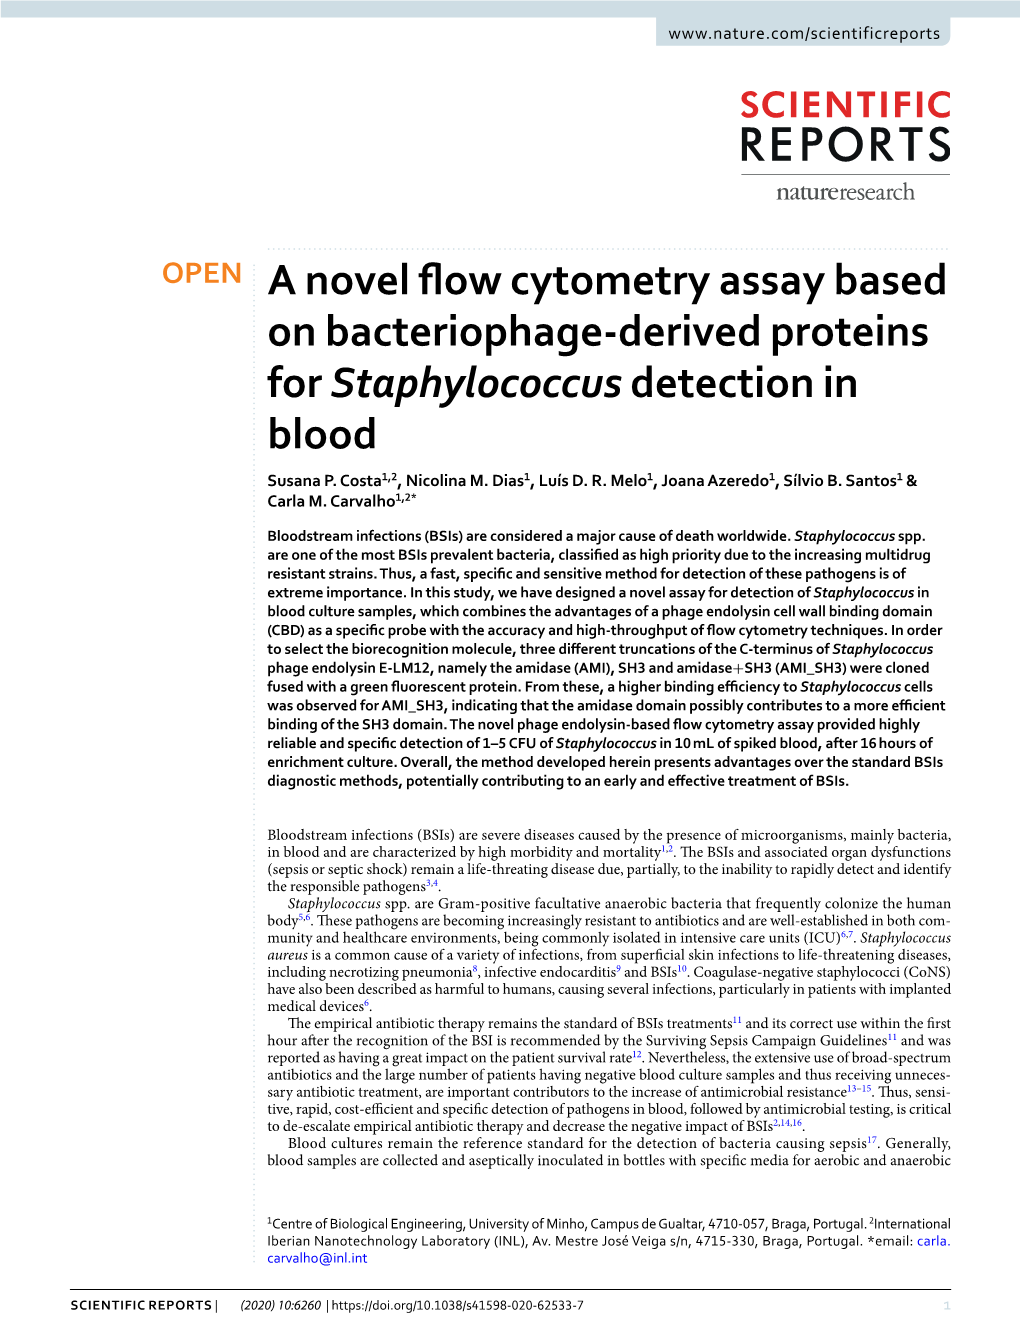 A Novel Flow Cytometry Assay Based on Bacteriophage-Derived Proteins